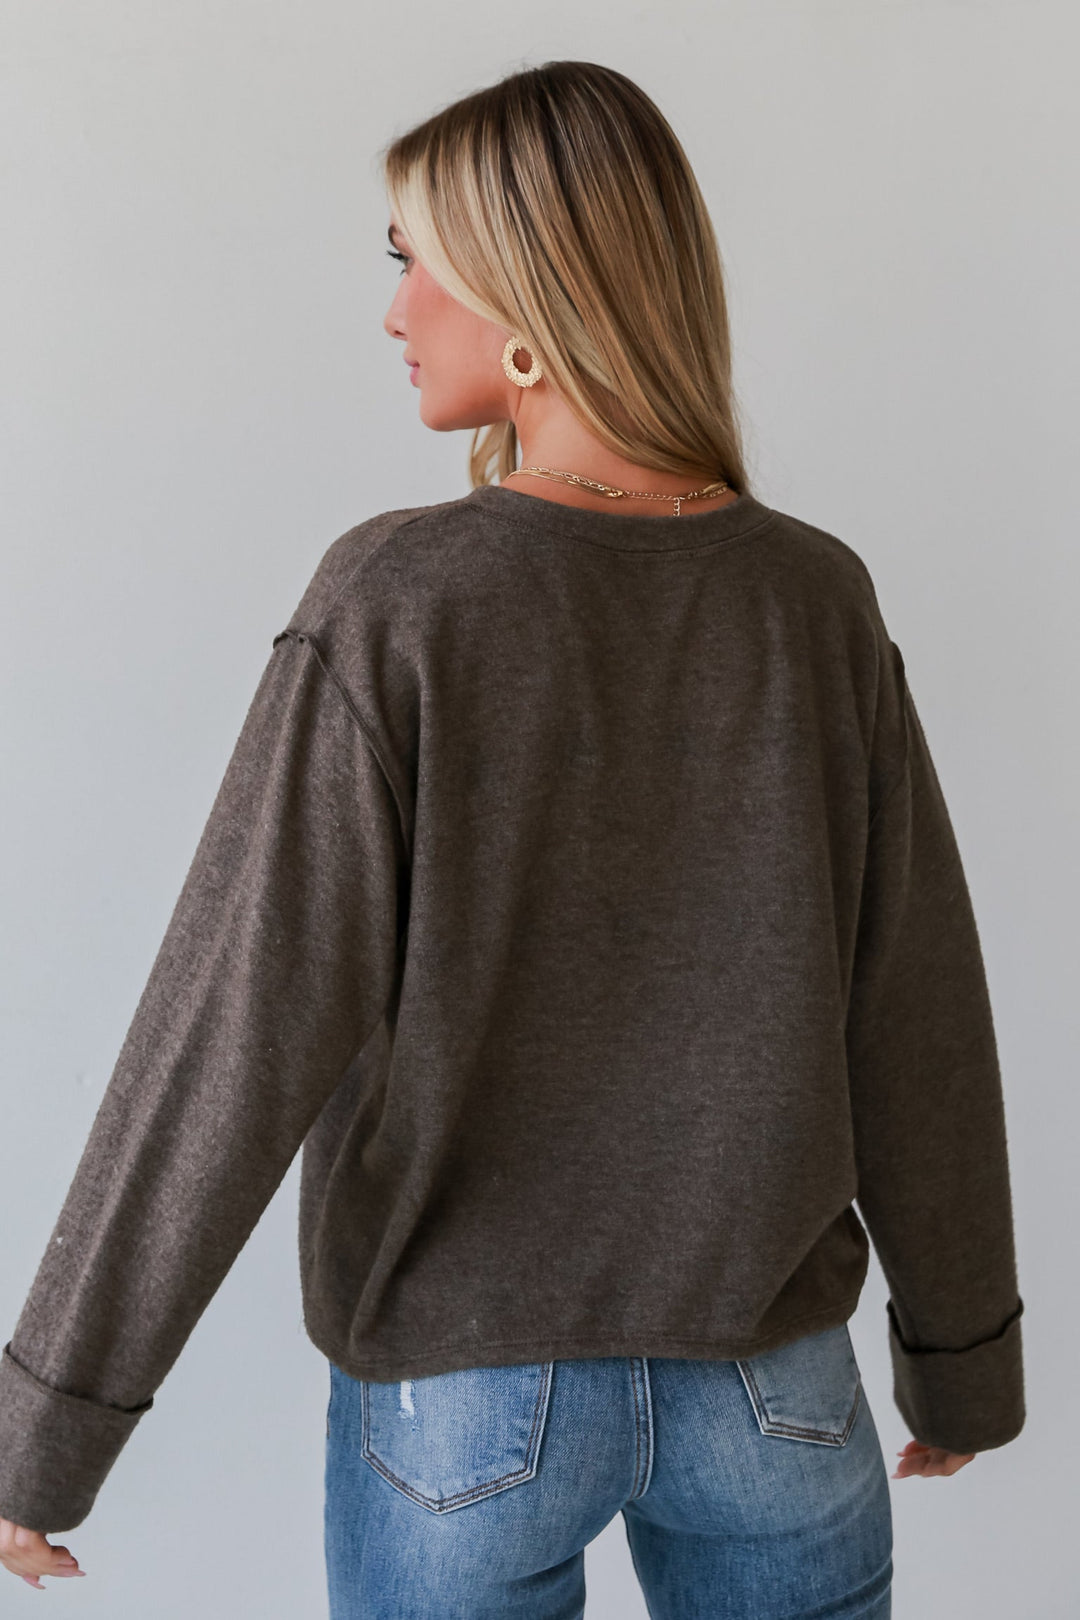 Olive Brushed Knit Top for women